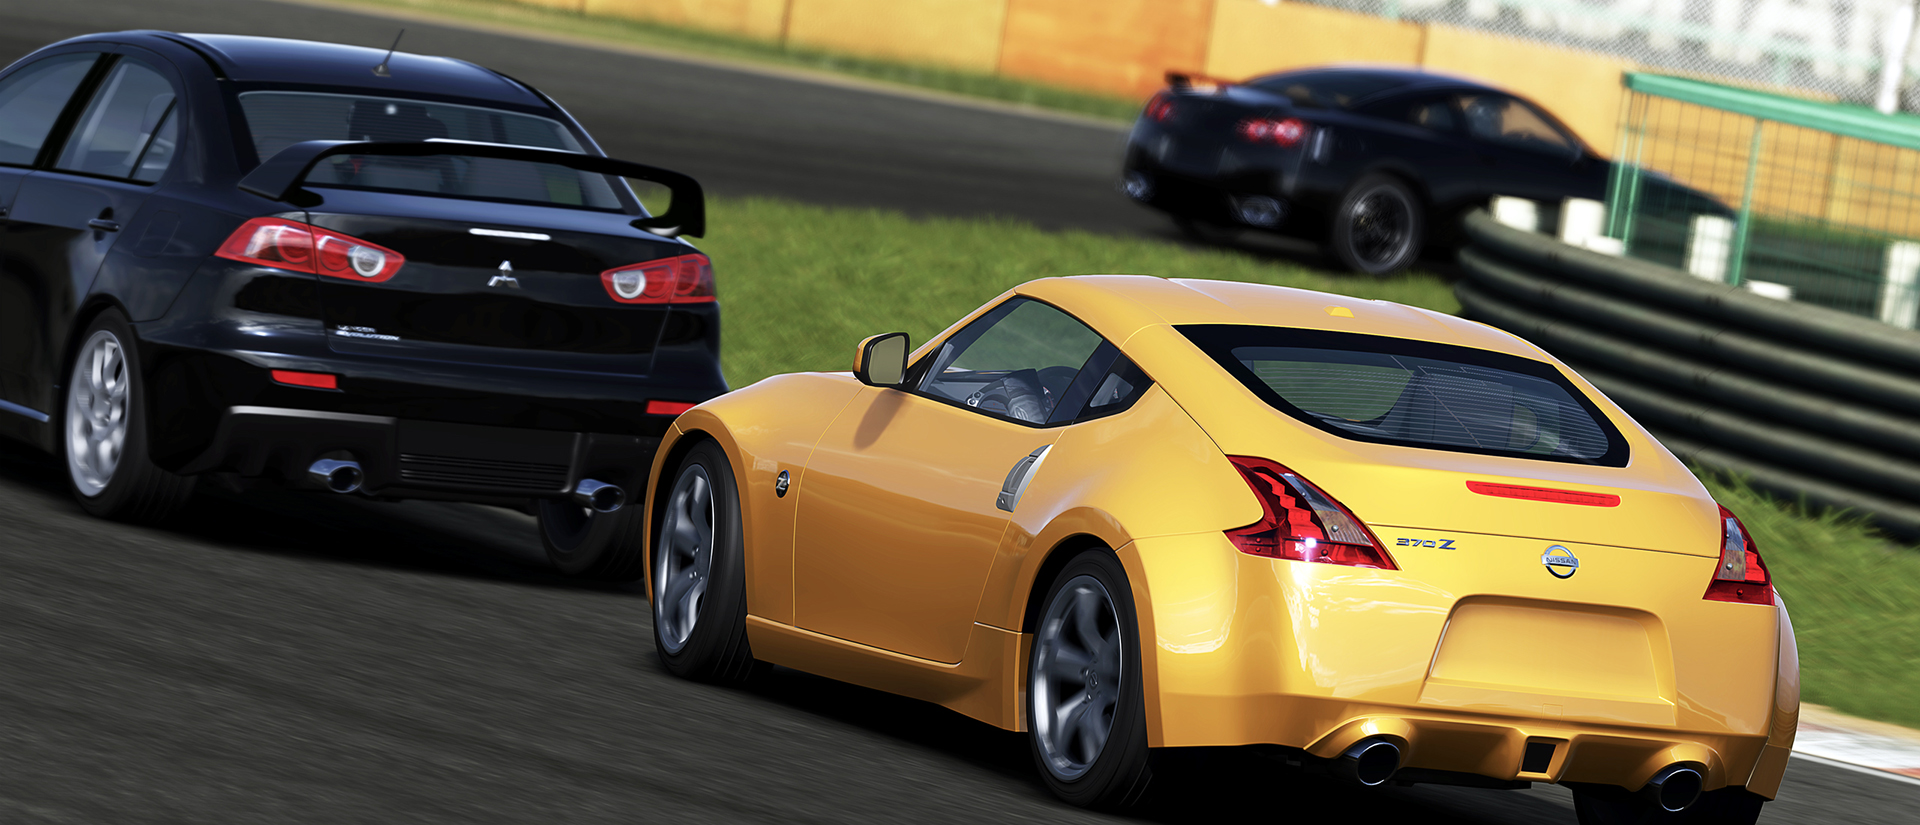 Amazing Forza Motorsport 4 Pictures & Backgrounds